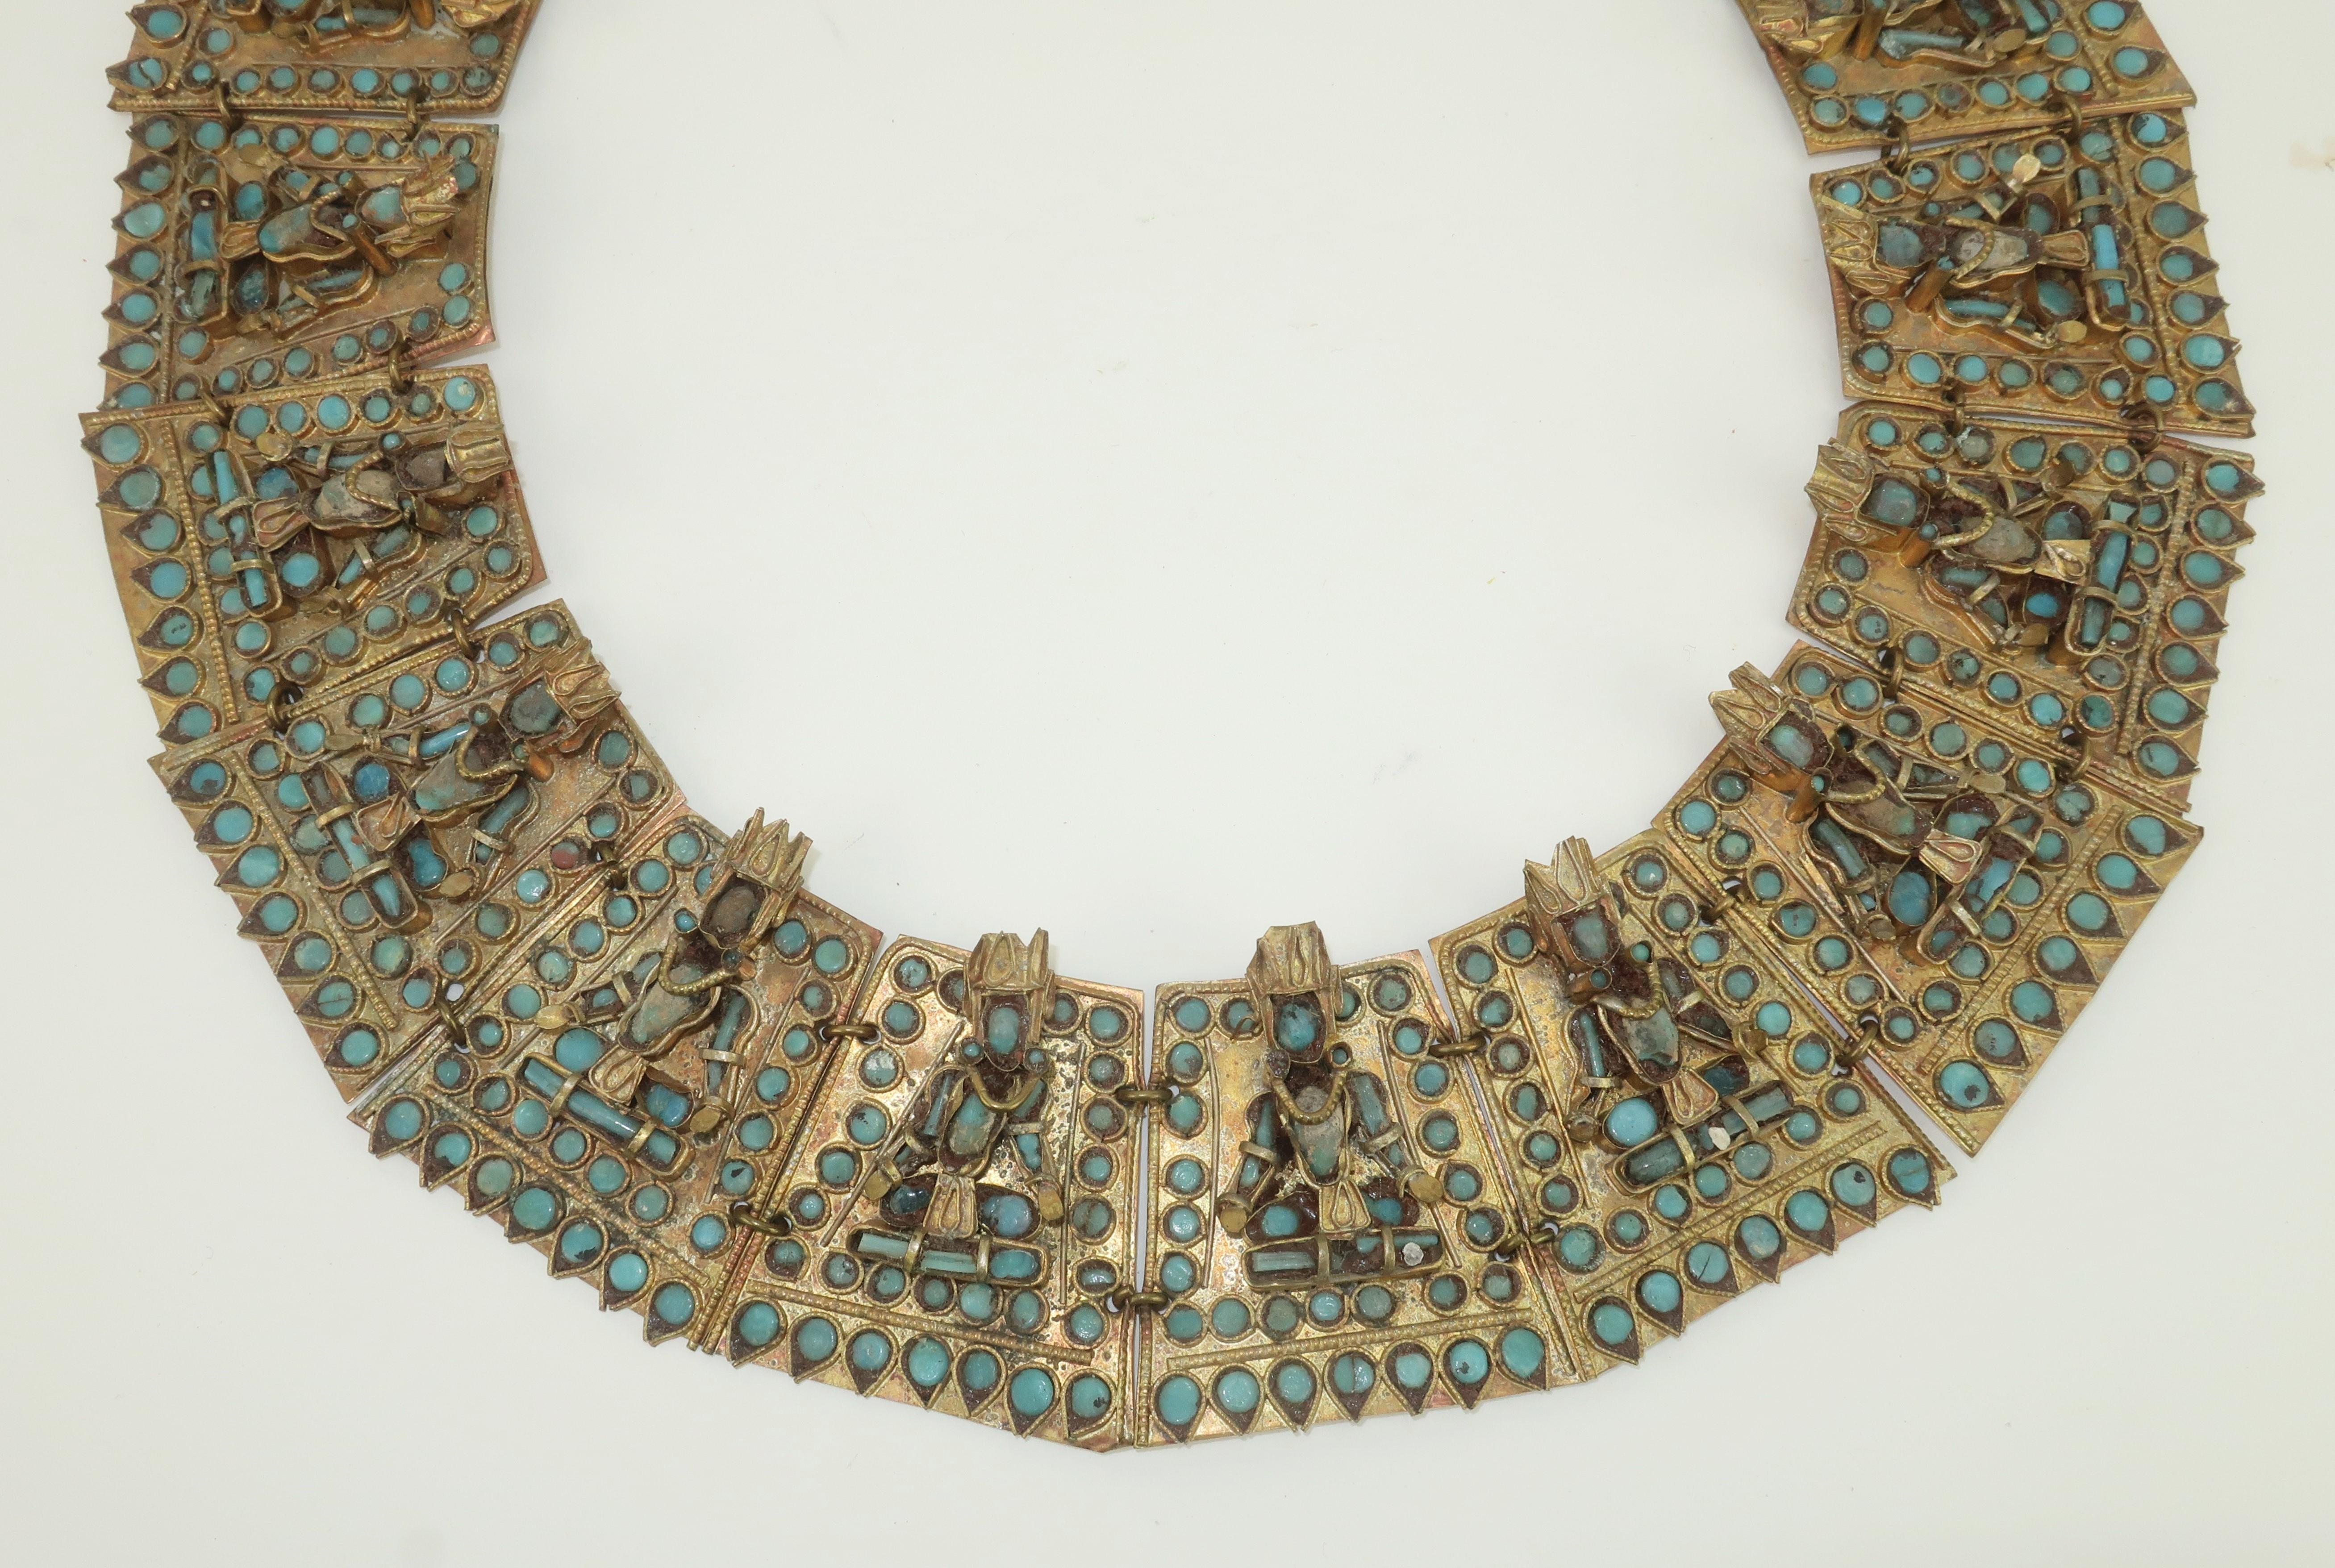 Vintage collar necklace in a brass metal with intricate filigree and costumed figures embellished with turquoise glass beads.  The figures are dancing and in prayerful positions with traditional head wear and necklaces.  There are two hook closures